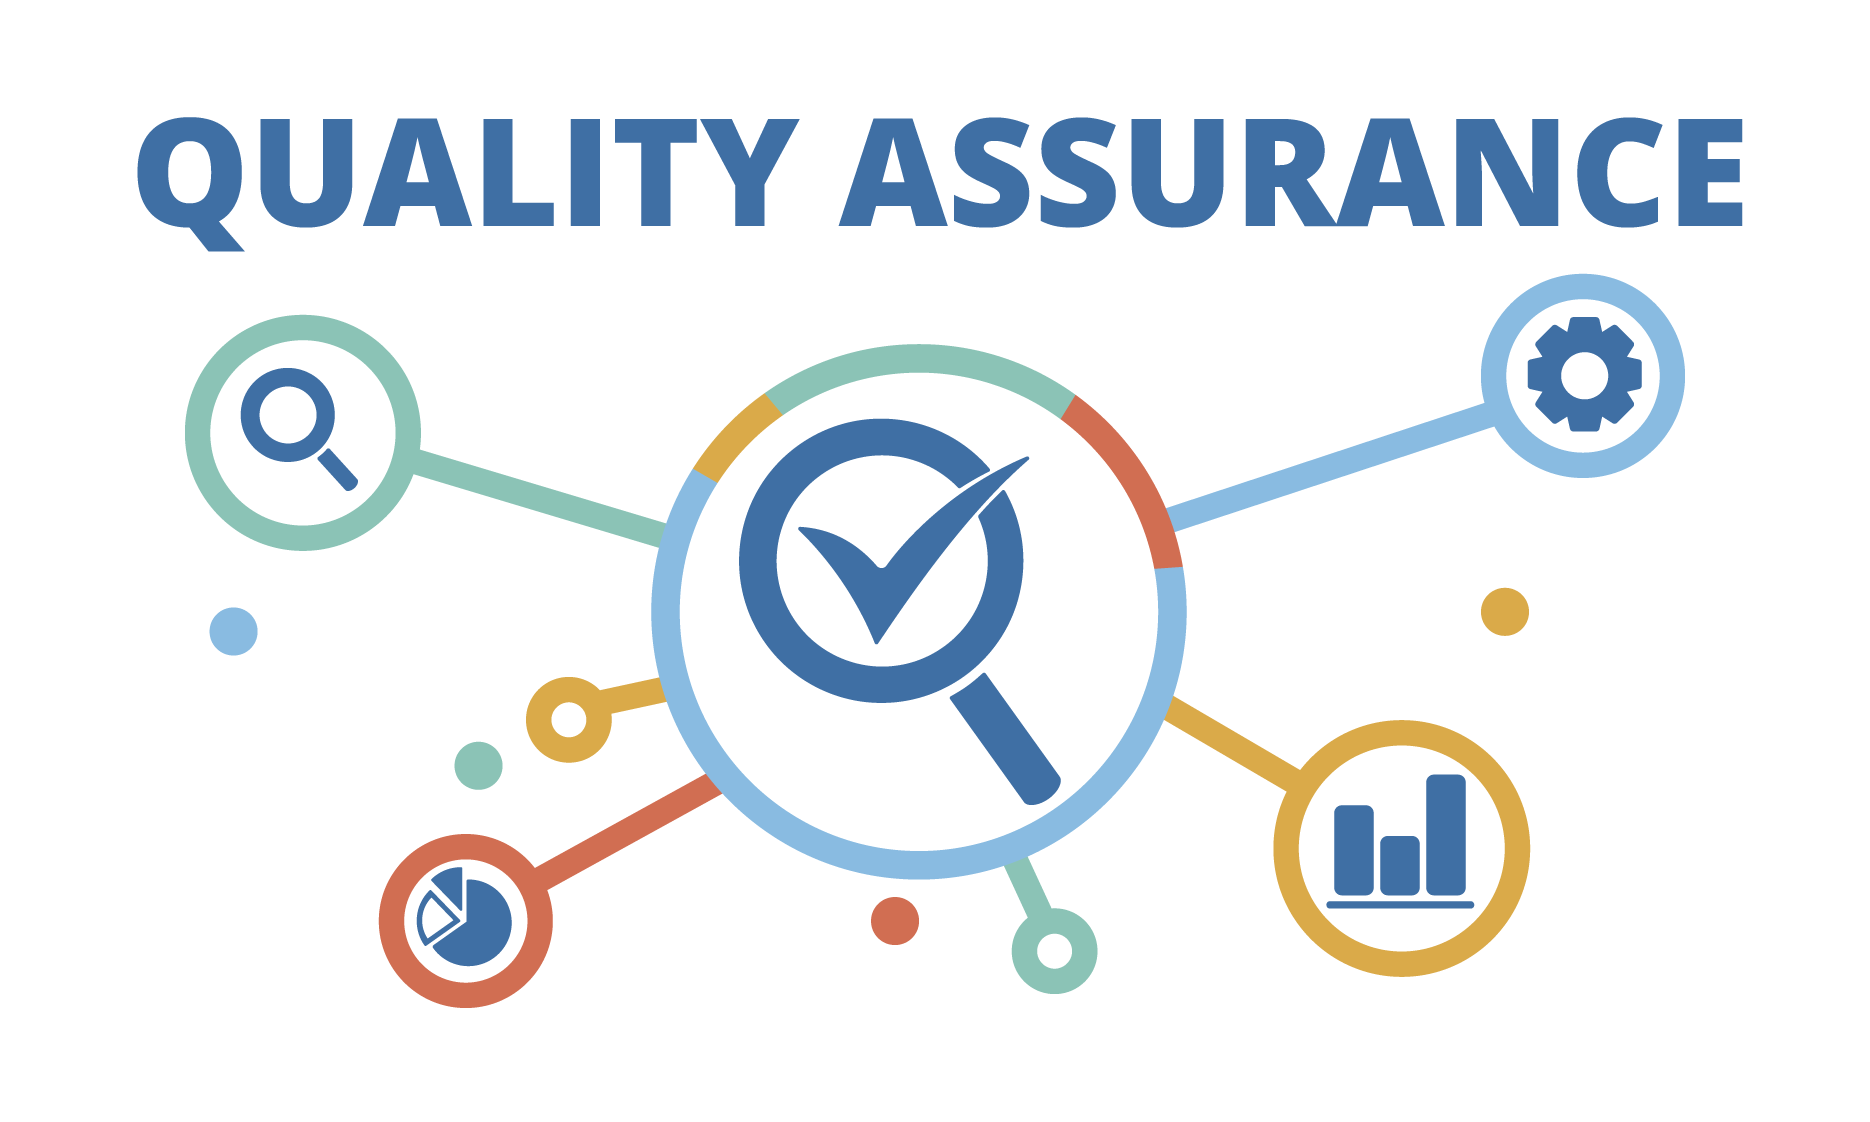 Are you having an Optimal Utilization of your QA Assets?